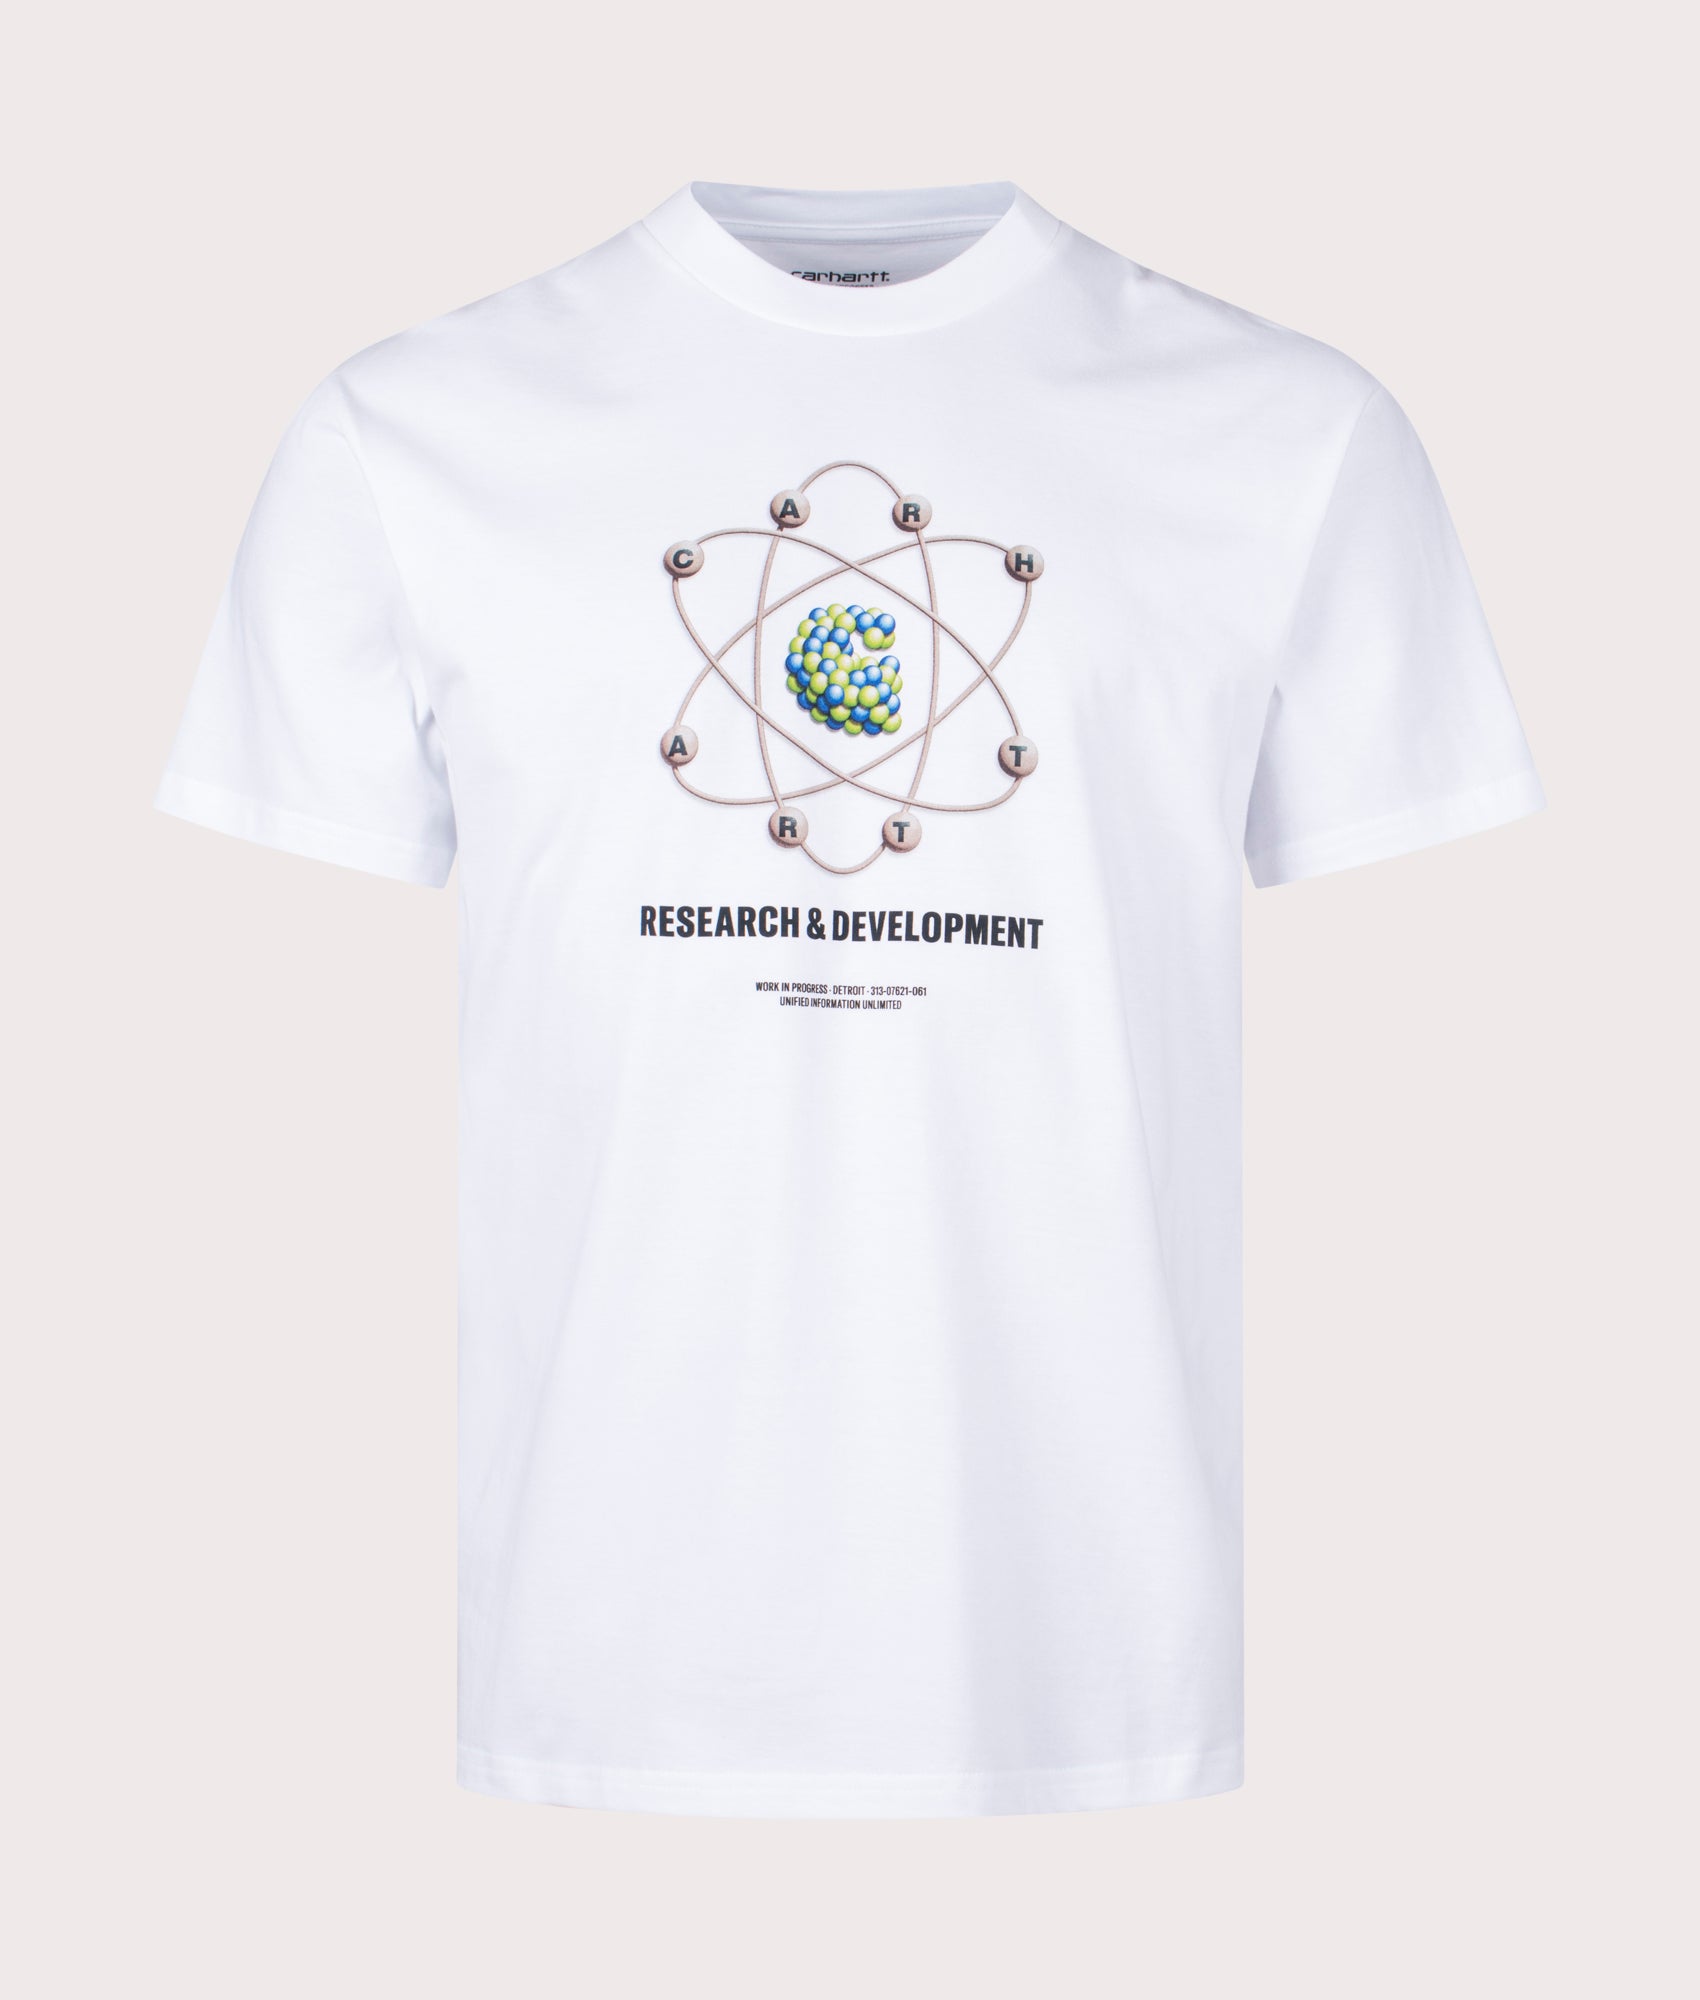 Carhartt WIP Mens Relaxed Fit R&D T-Shirt - Colour: 02XX White - Size: Small